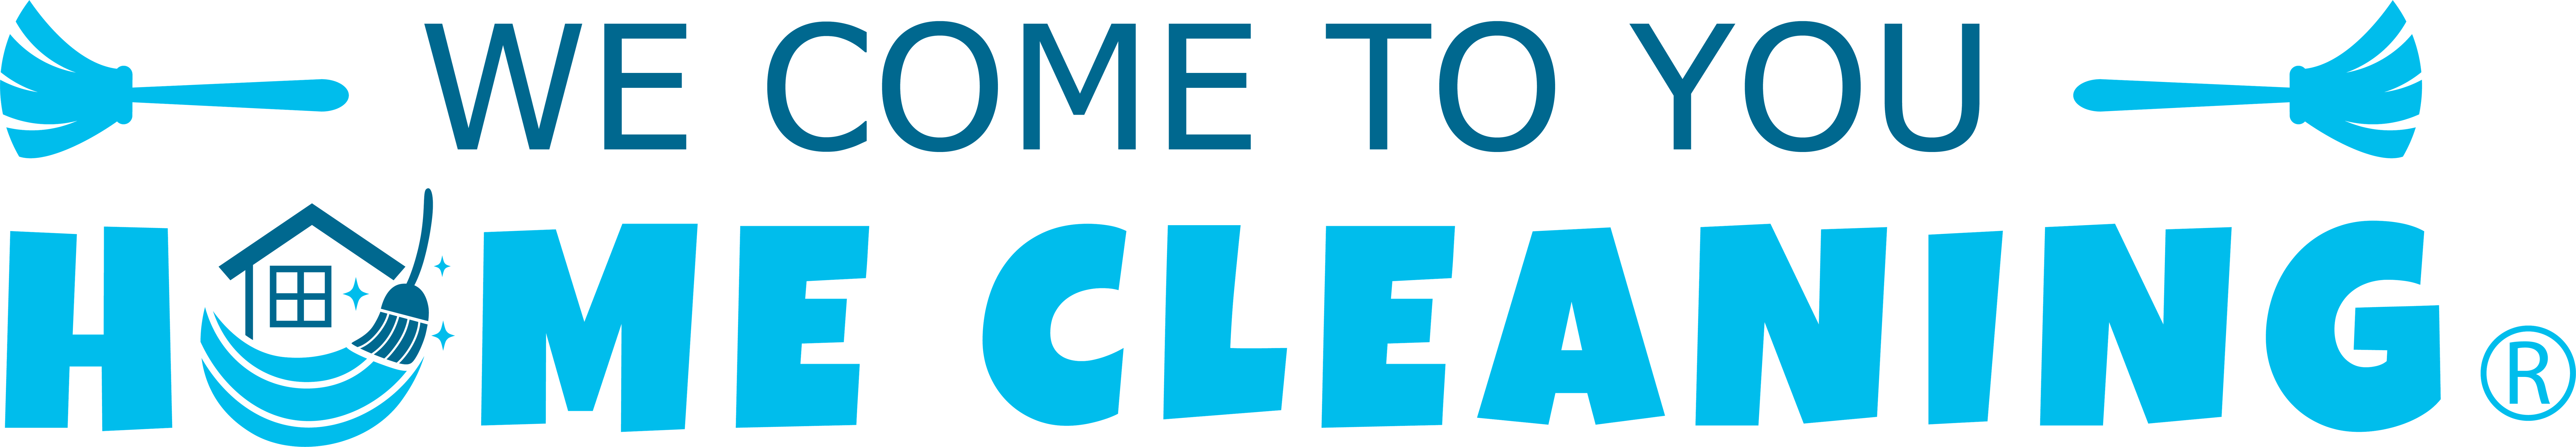 wecometoyouhomecleaning.com